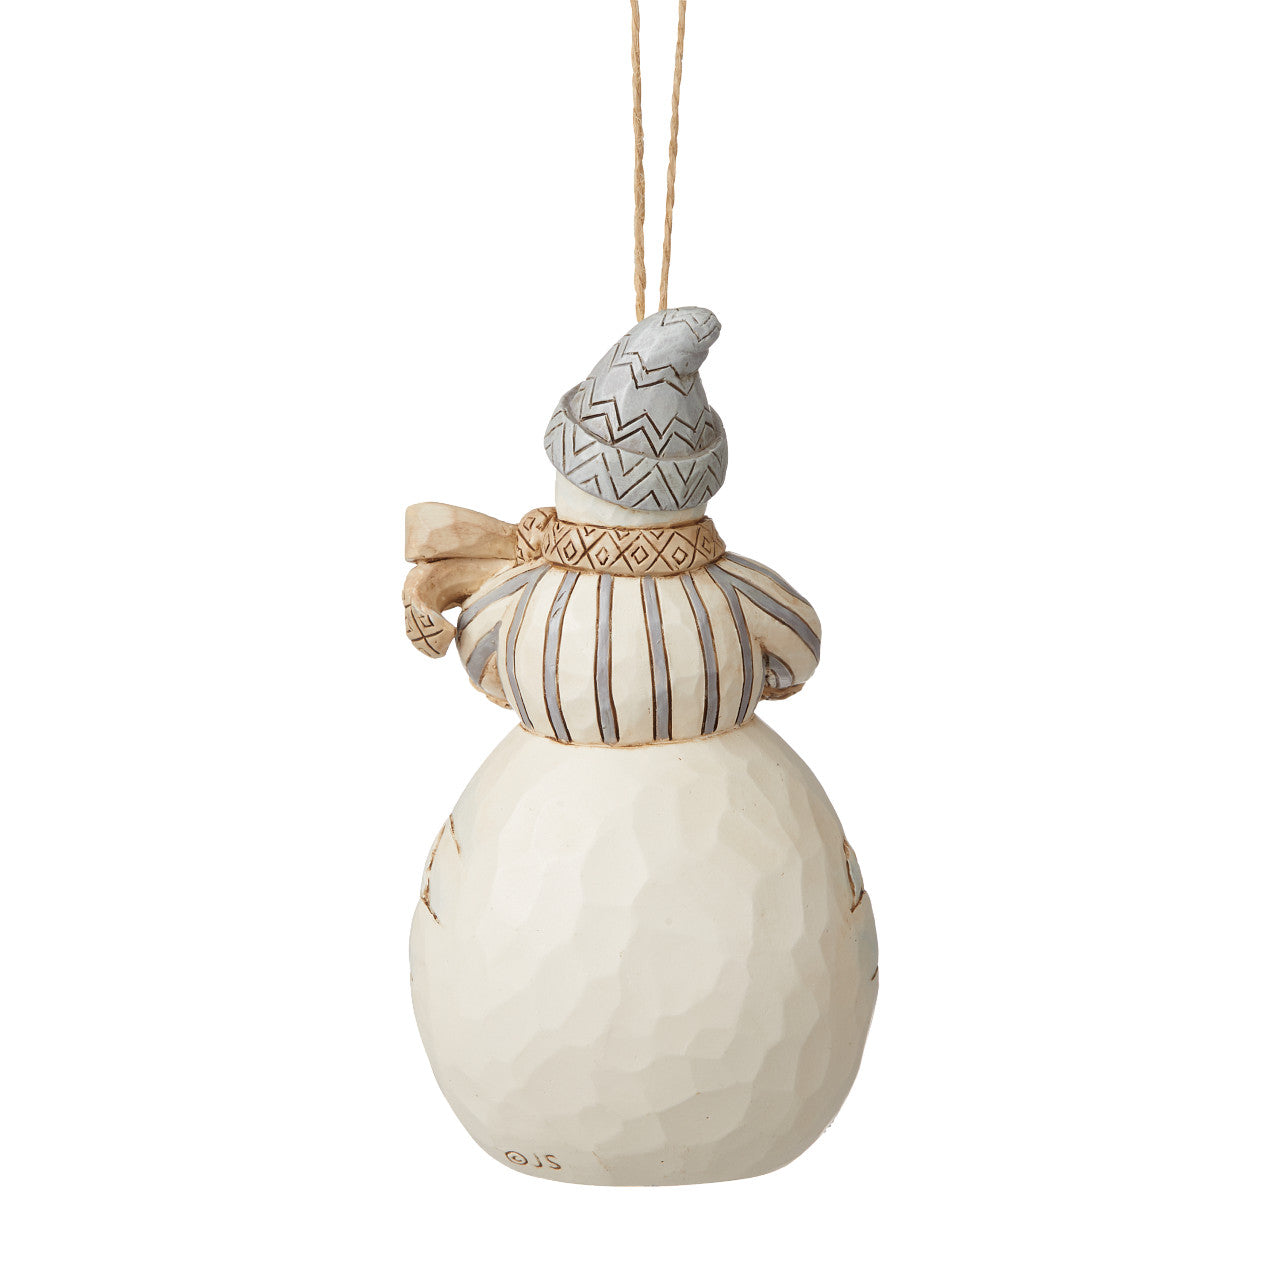 White Woodland Snowman With Basket Ornament Hanging Ornament